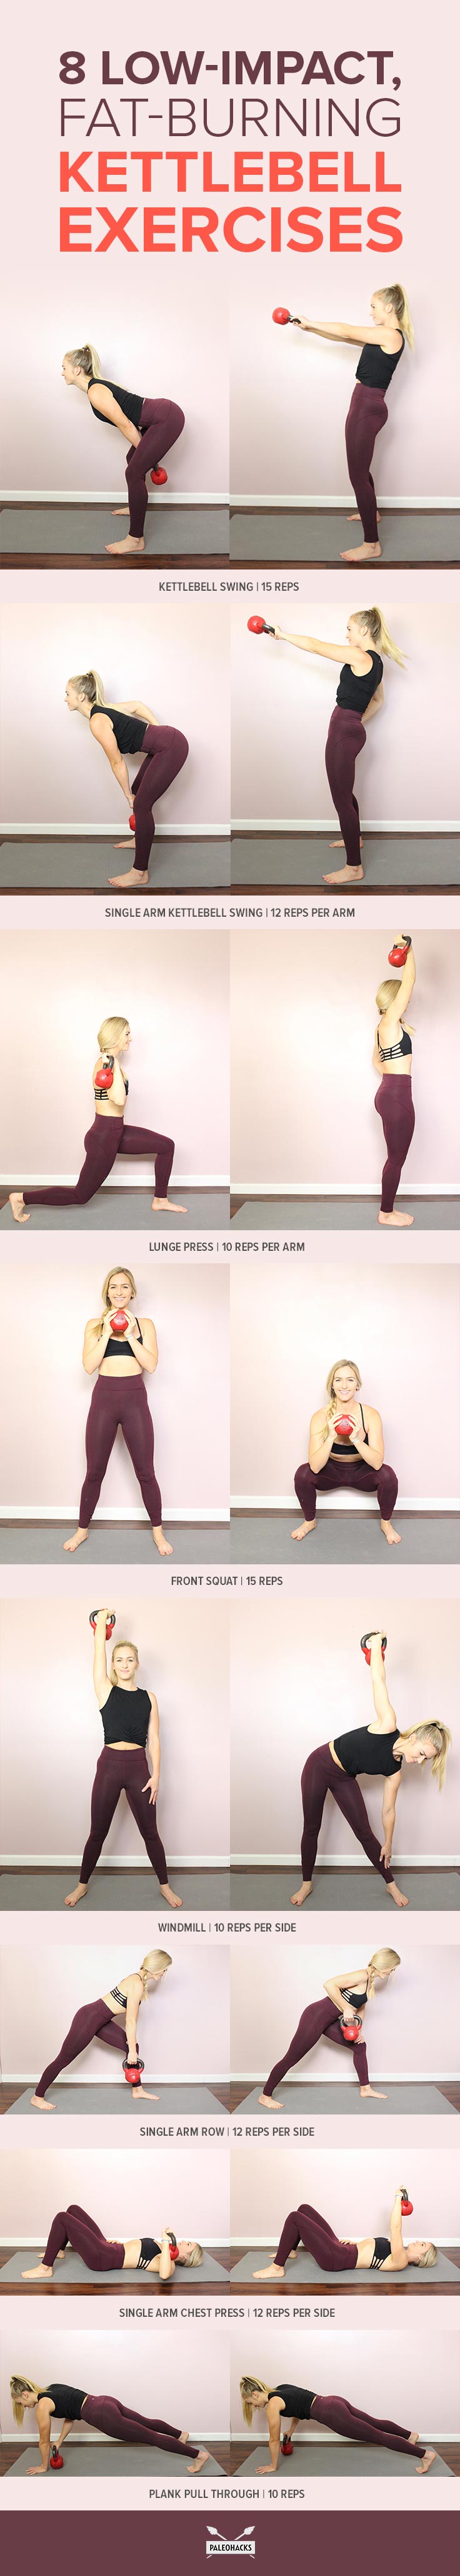 Build strength and burn fat with these simple, low impact kettlebell exercises you can do anywhere. Do these 8 exercises 3 times a week, and see how fit you become!